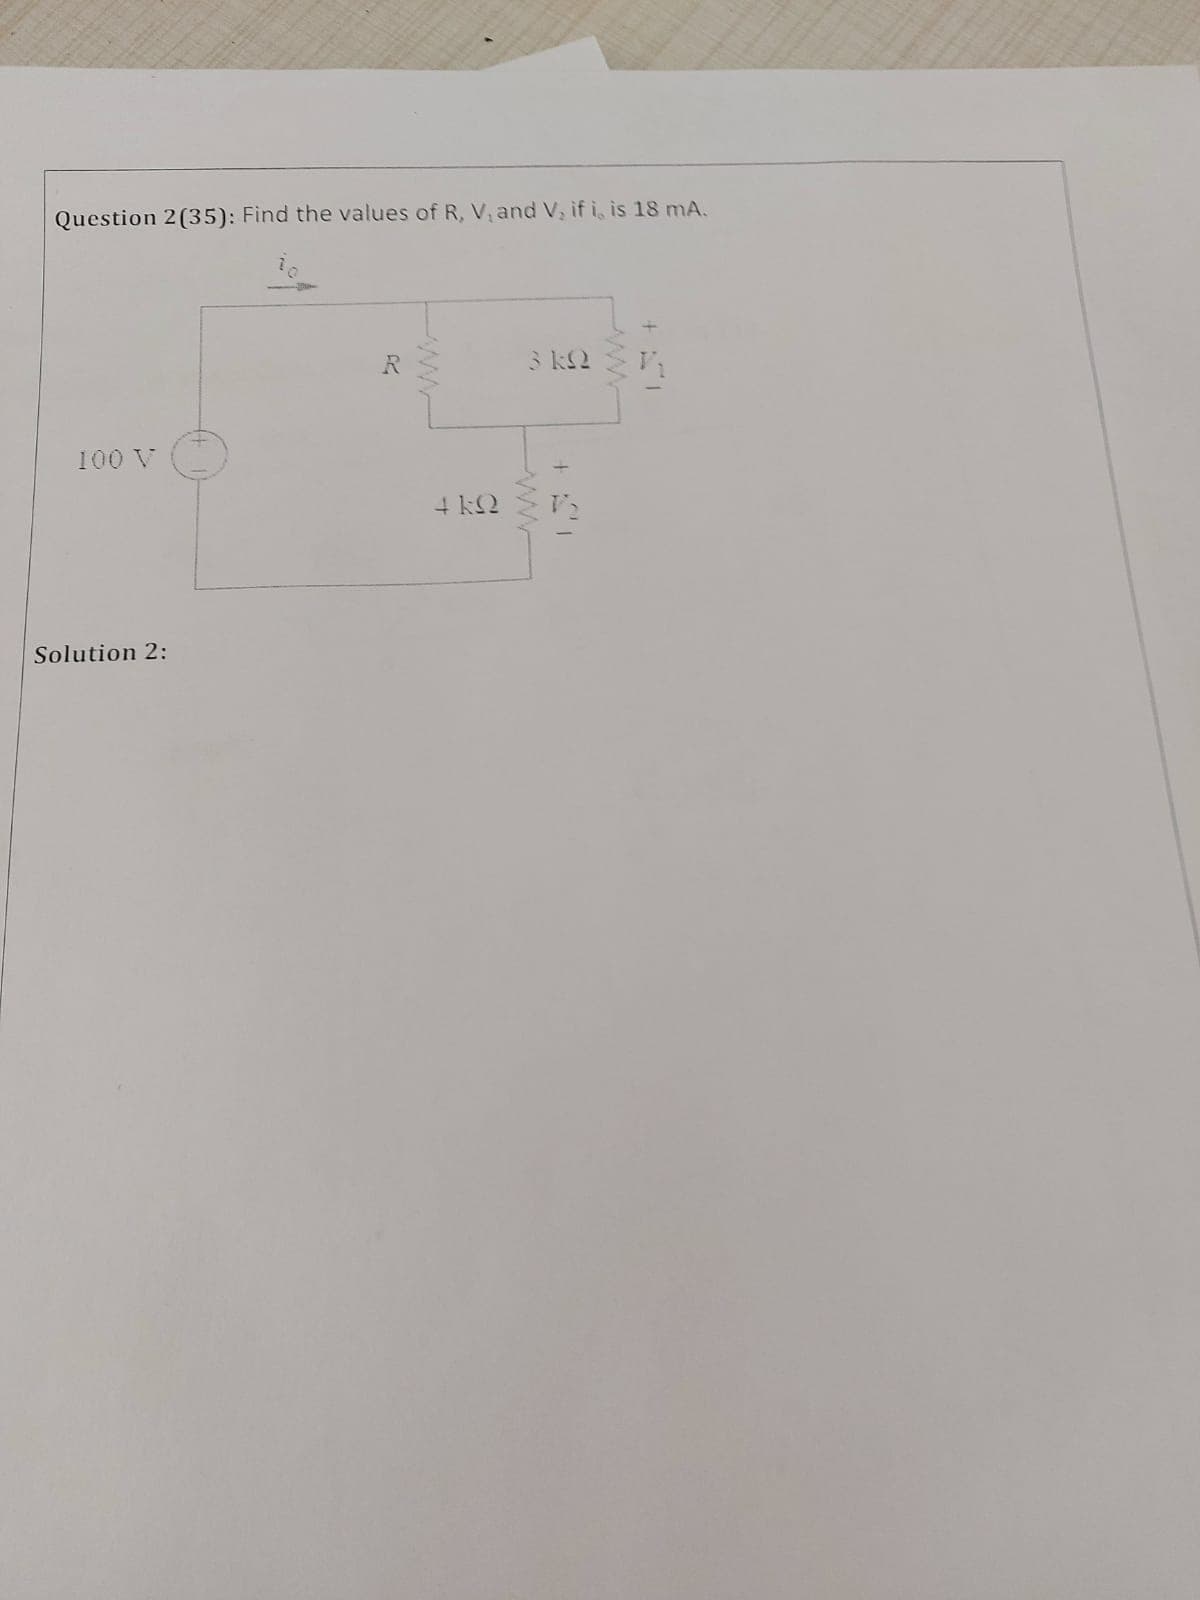 Question 2(35): Find the values of R, V, and V, if i, is 18 mA.
3 k2
100 V
+ kQ
Solution 2:
ww
ww
